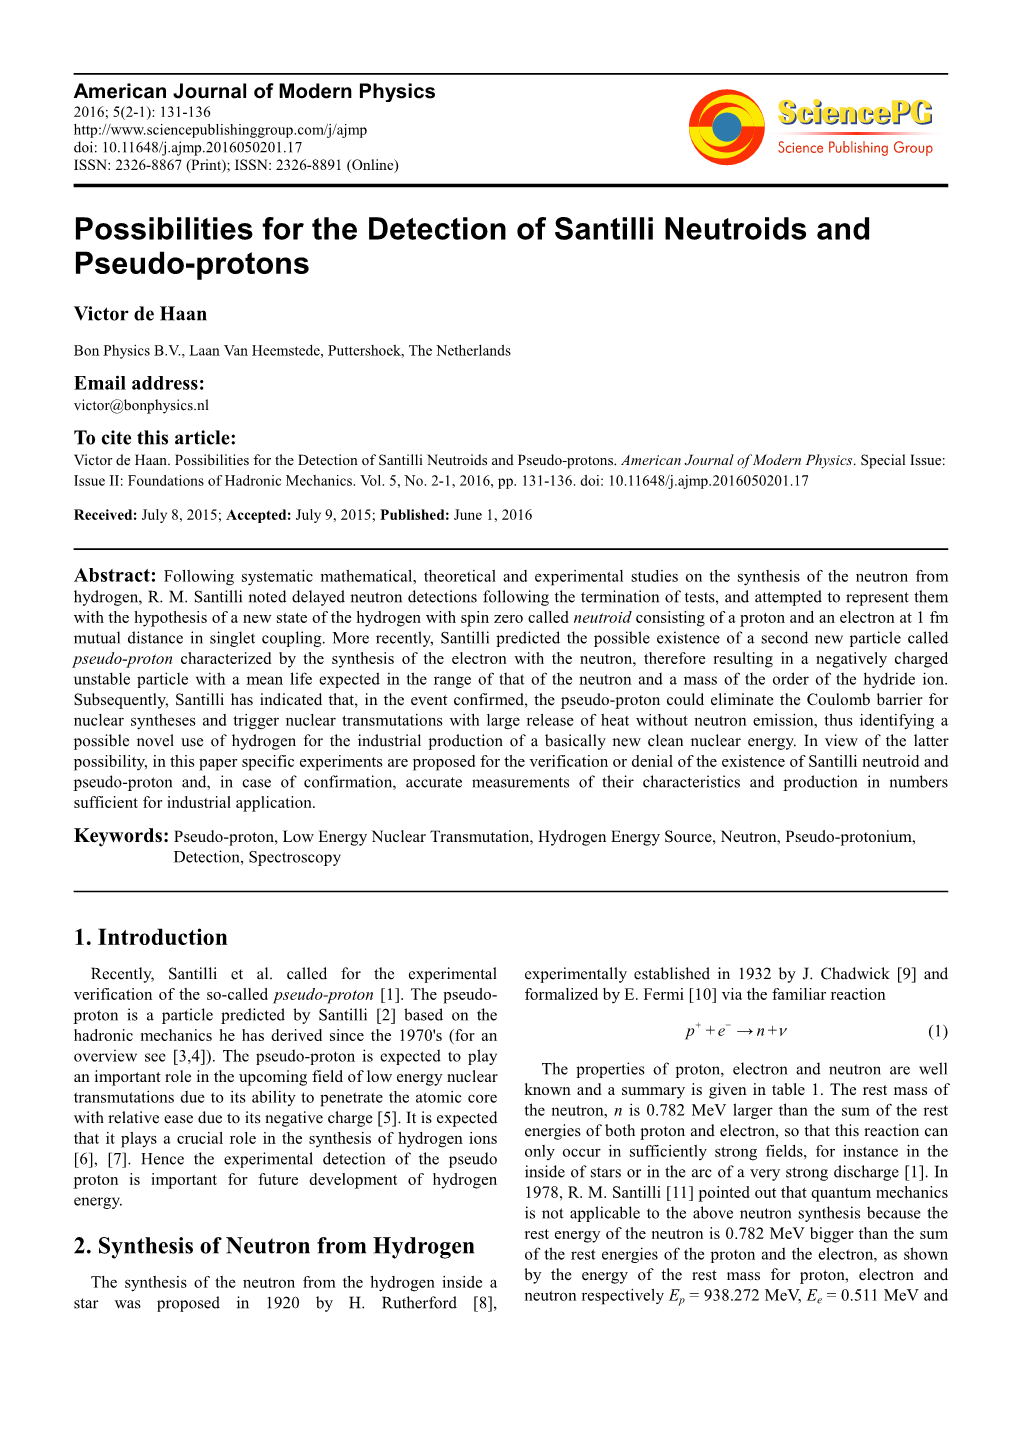 Possibilities for the Detection of Santilli Neutroids and Pseudo-Protons